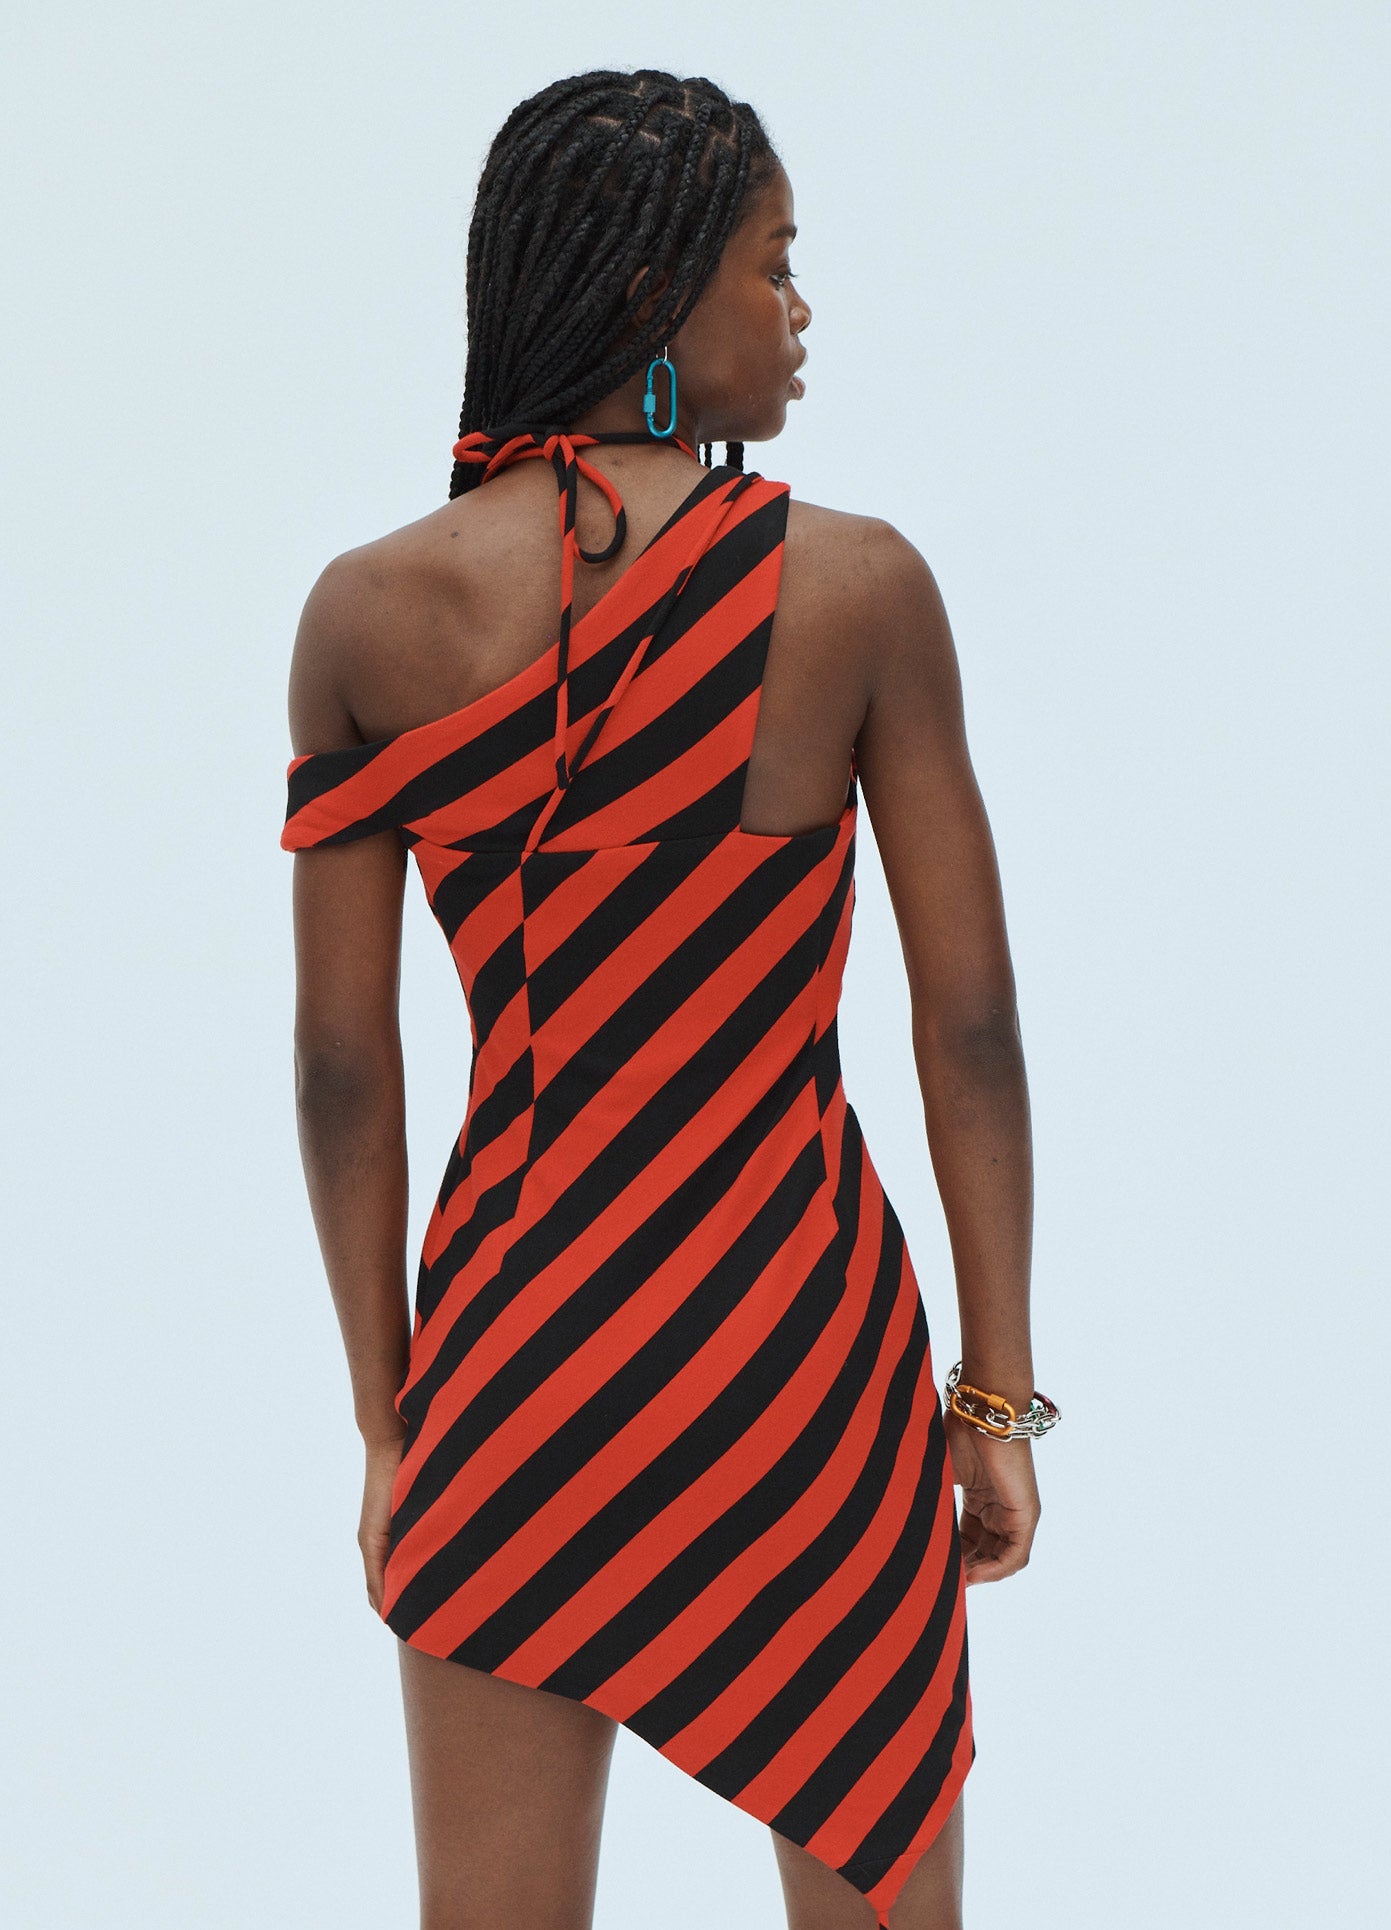 MONSE Striped Asymmetrical Over the Shoulder Keyhole Dress in Black and Red on Model Back View